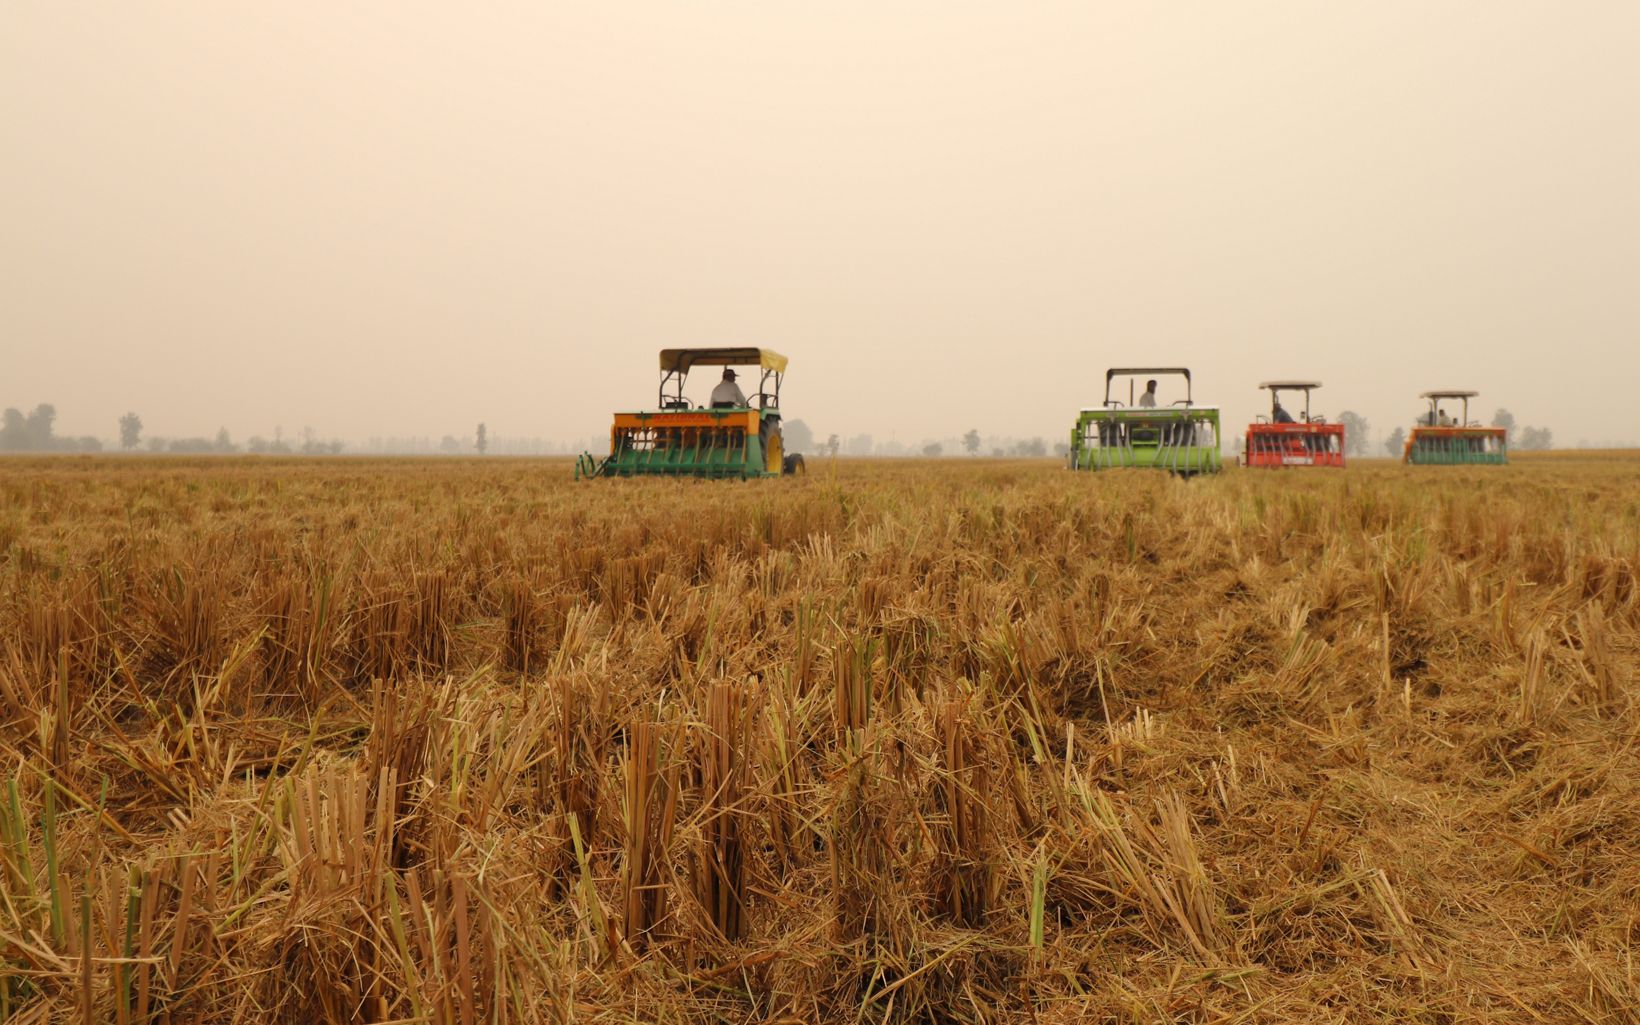 four plows drive through a brown field against a smoggy sky